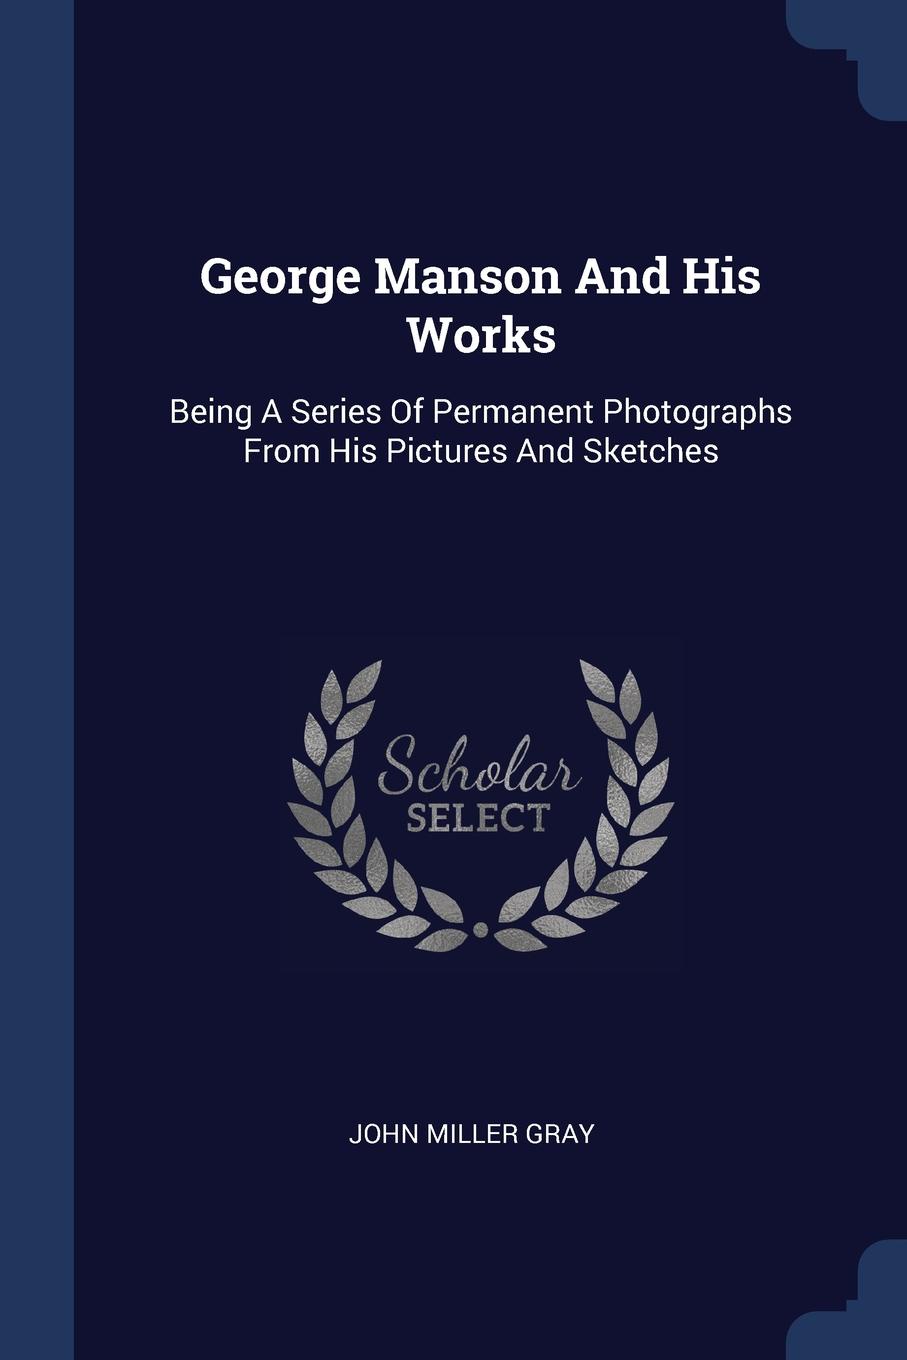 George Manson And His Works. Being A Series Of Permanent Photographs From His Pictures And Sketches